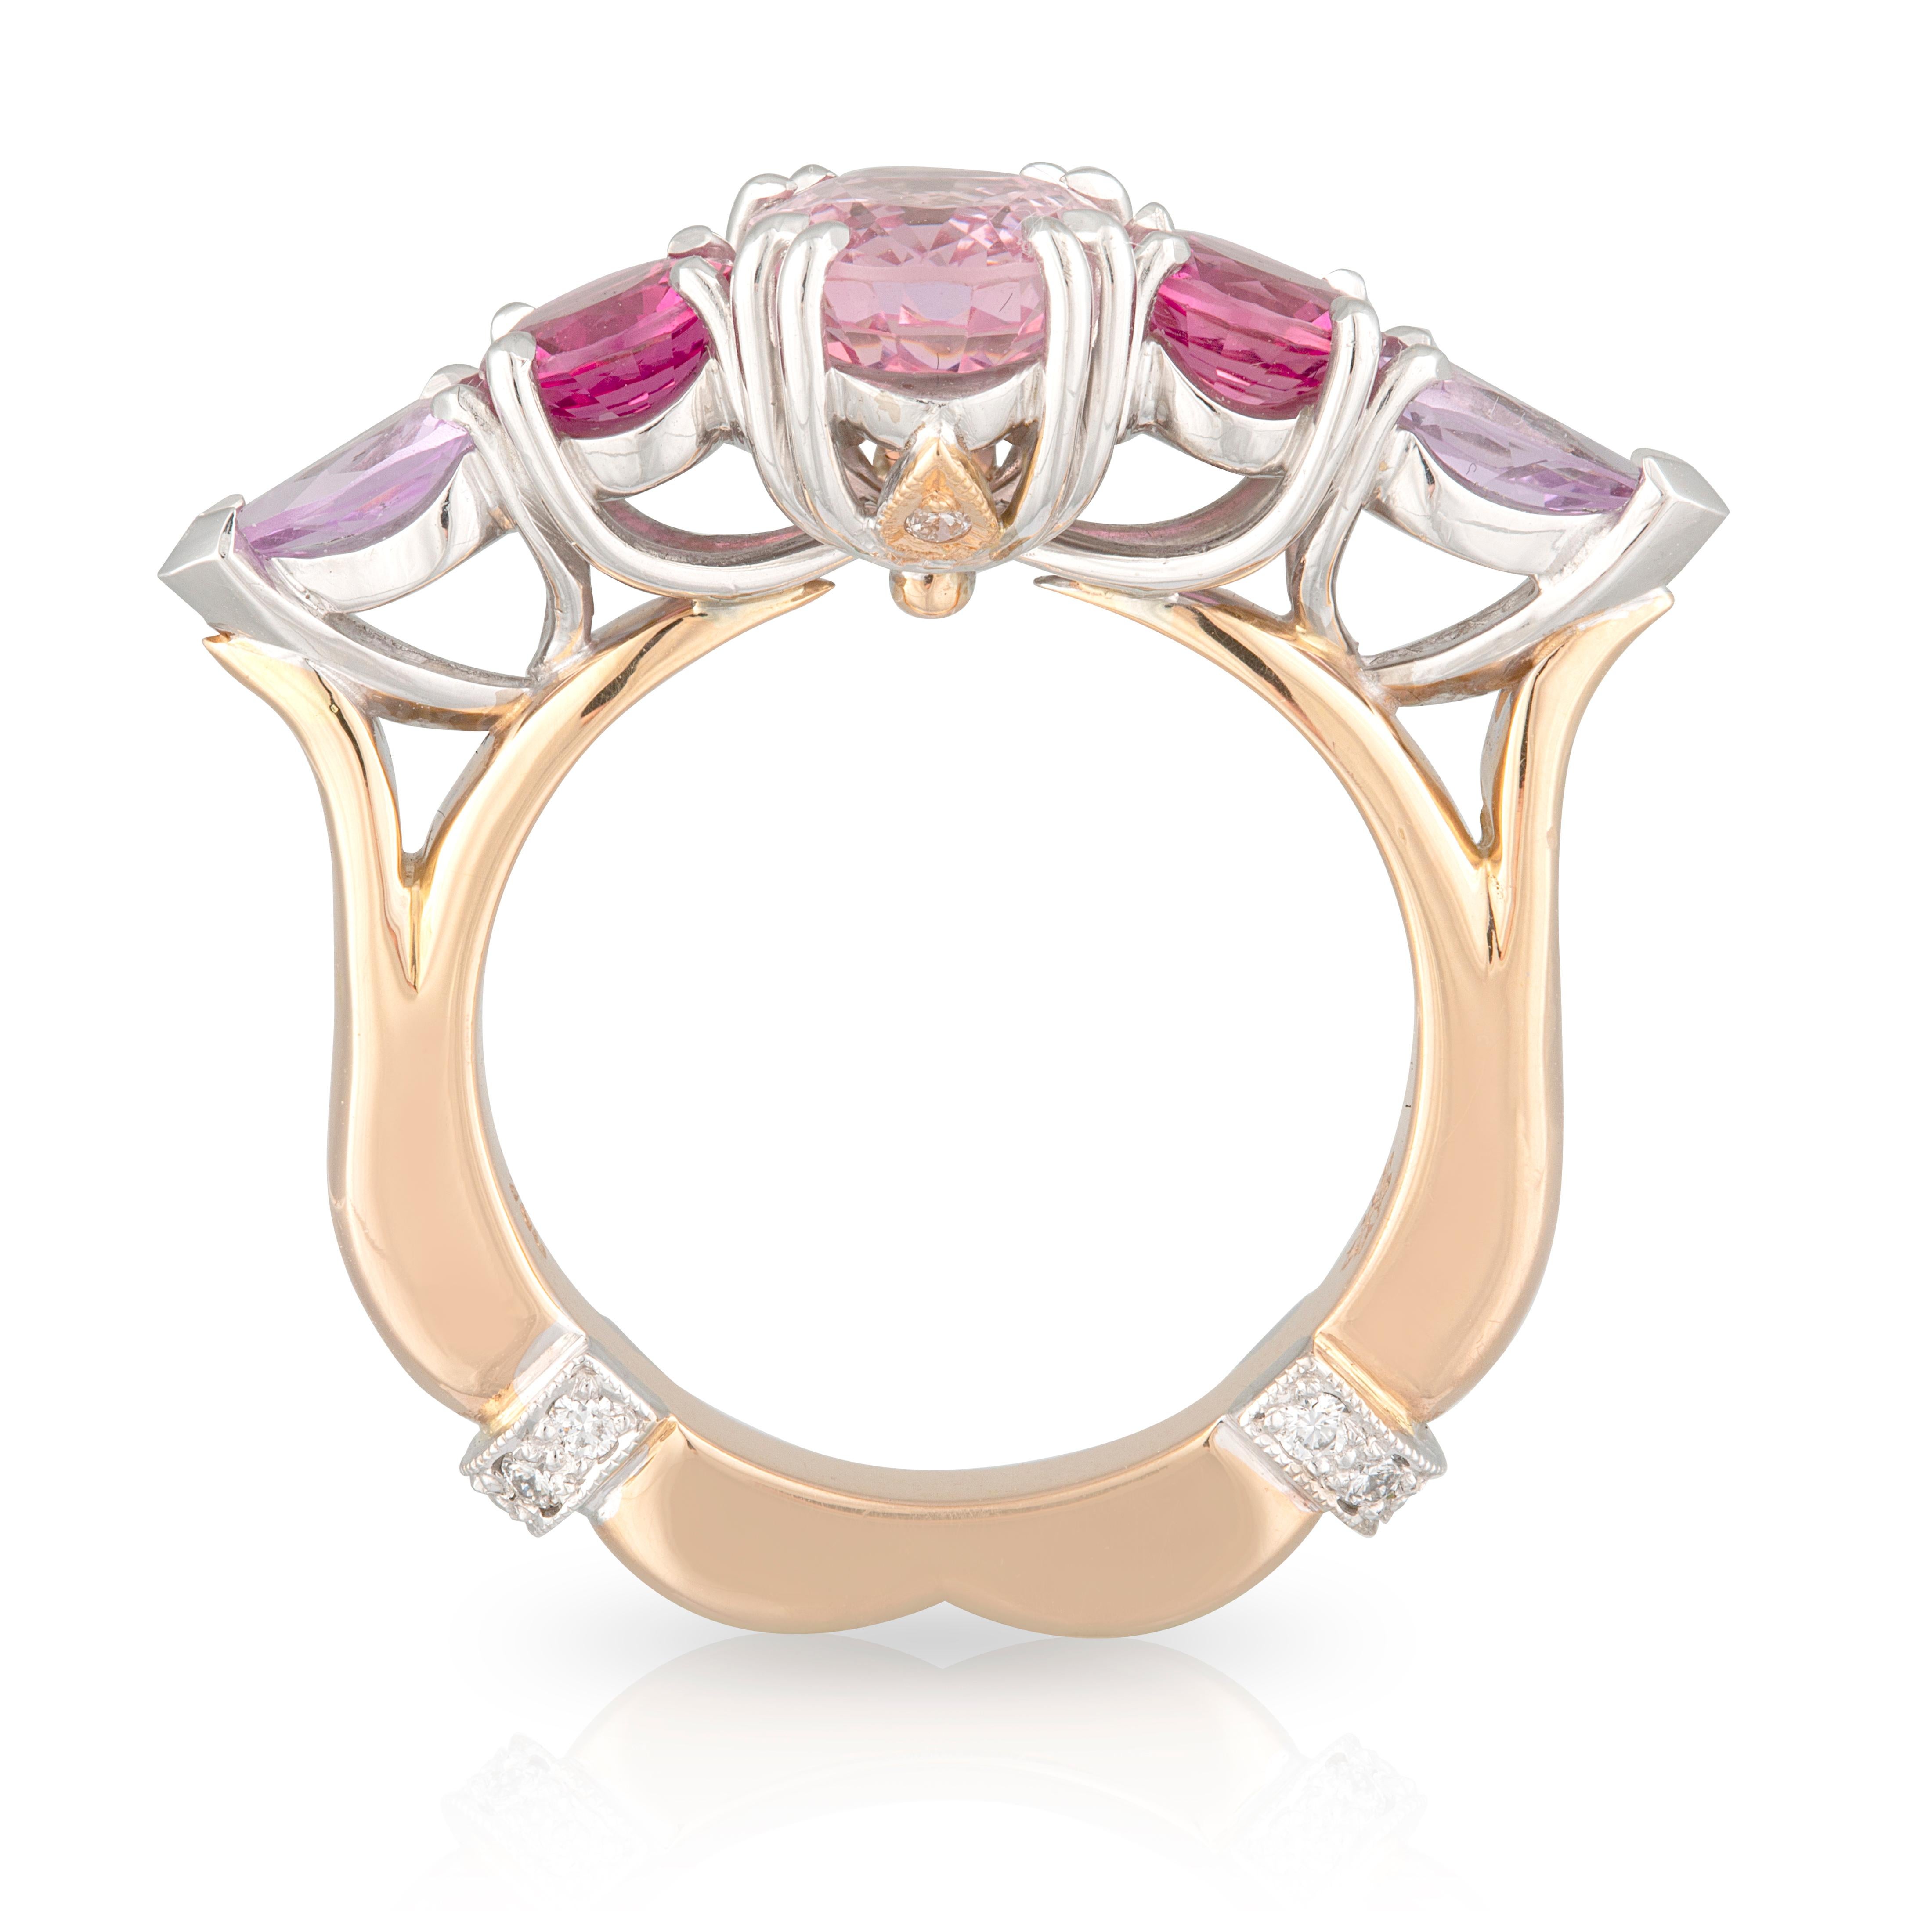 Handmade 18ct Rose & White Gold Oval 2.11ct Pink Spinel, Pink Tourmaline, Purple Sapphire & Diamond Dress Ring with intricate shank detail. TDW 0.10ct.
